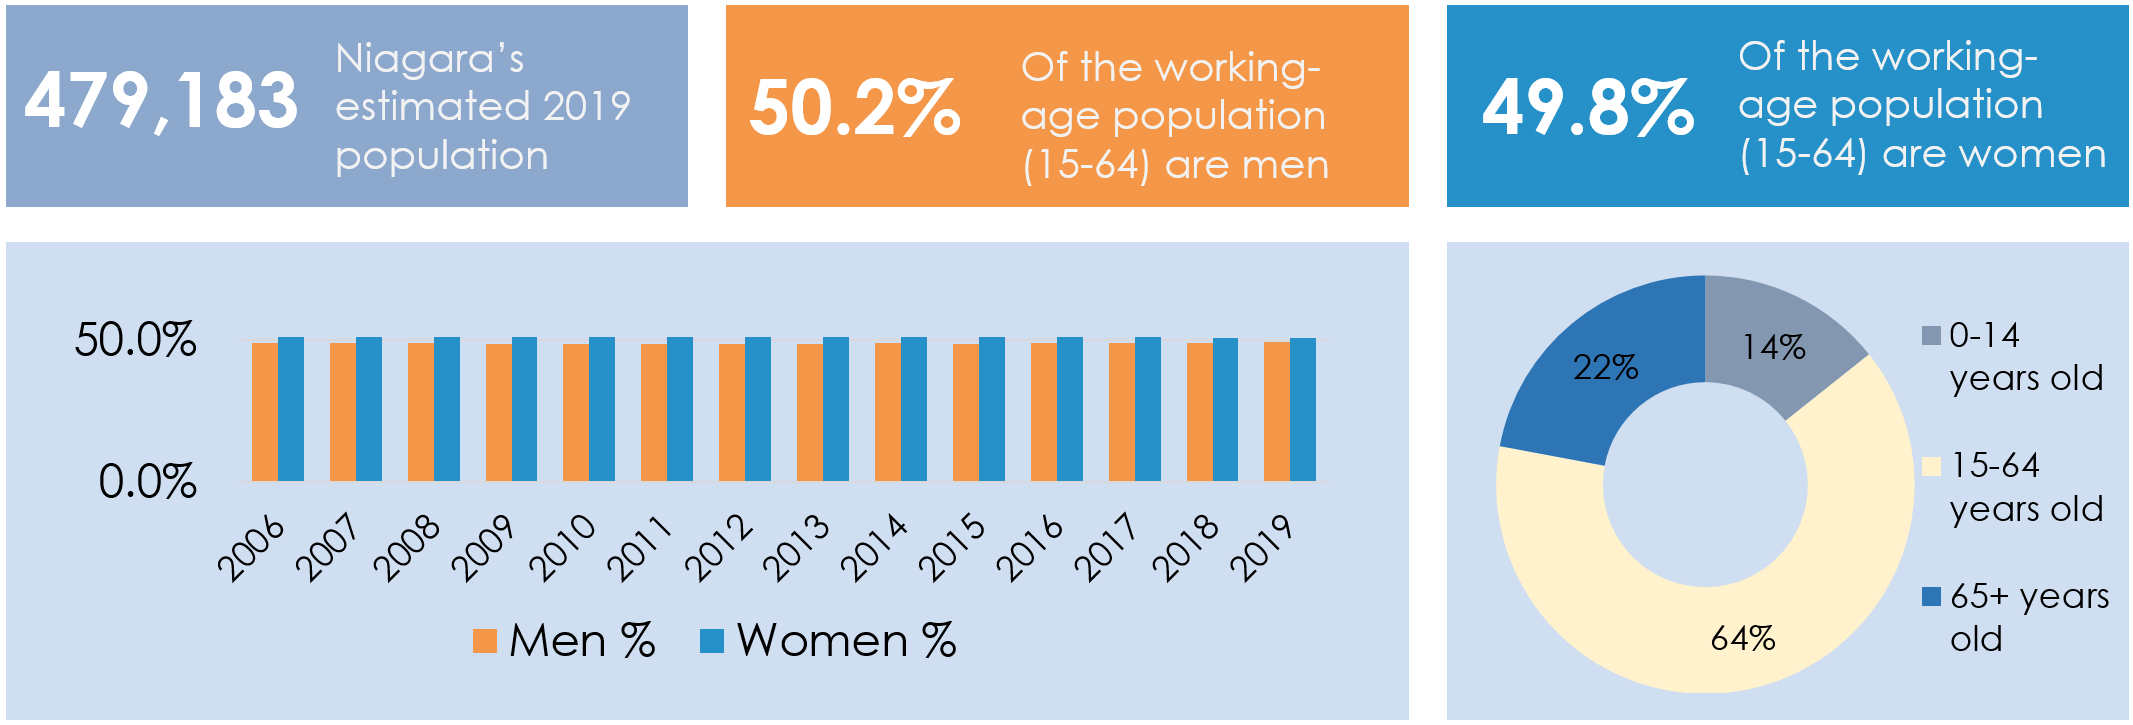 Infographic showing the following data: Niagara's estimated population in 2019 was 479,183. Of that population, 50.2% of the working-age population (15-64) are men, and 49.8% are women. 64% of Niagara's population fall within the working-age range, while 14% of the population ranged between 0-14 years of age and 22% was over 65 years old.